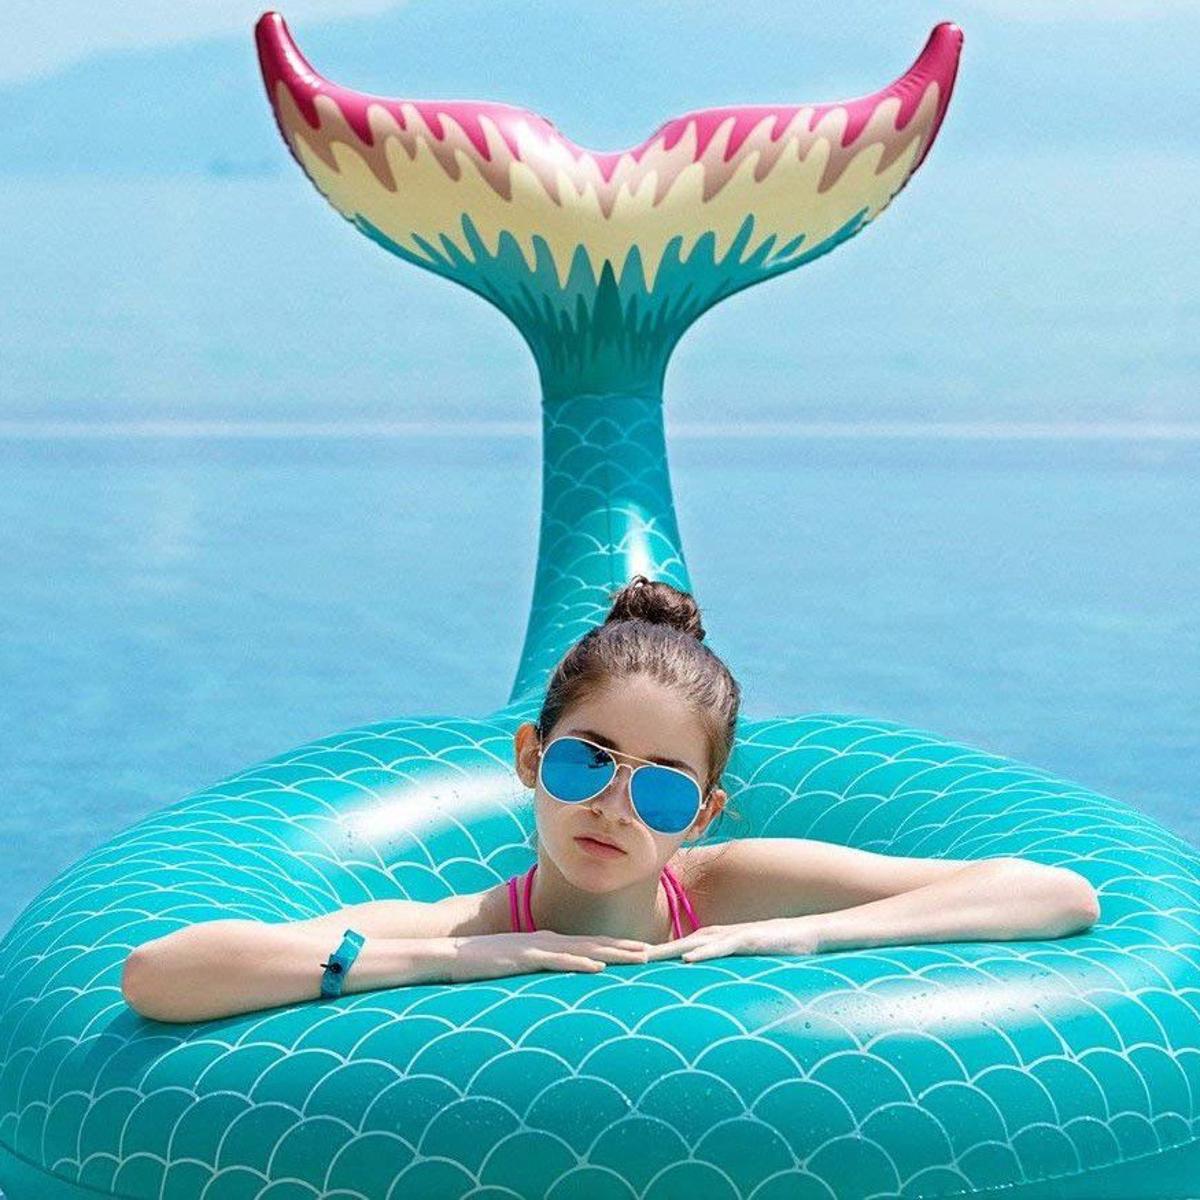 Buying Guide: If you need a ridiculous pool float, Jasonwell has